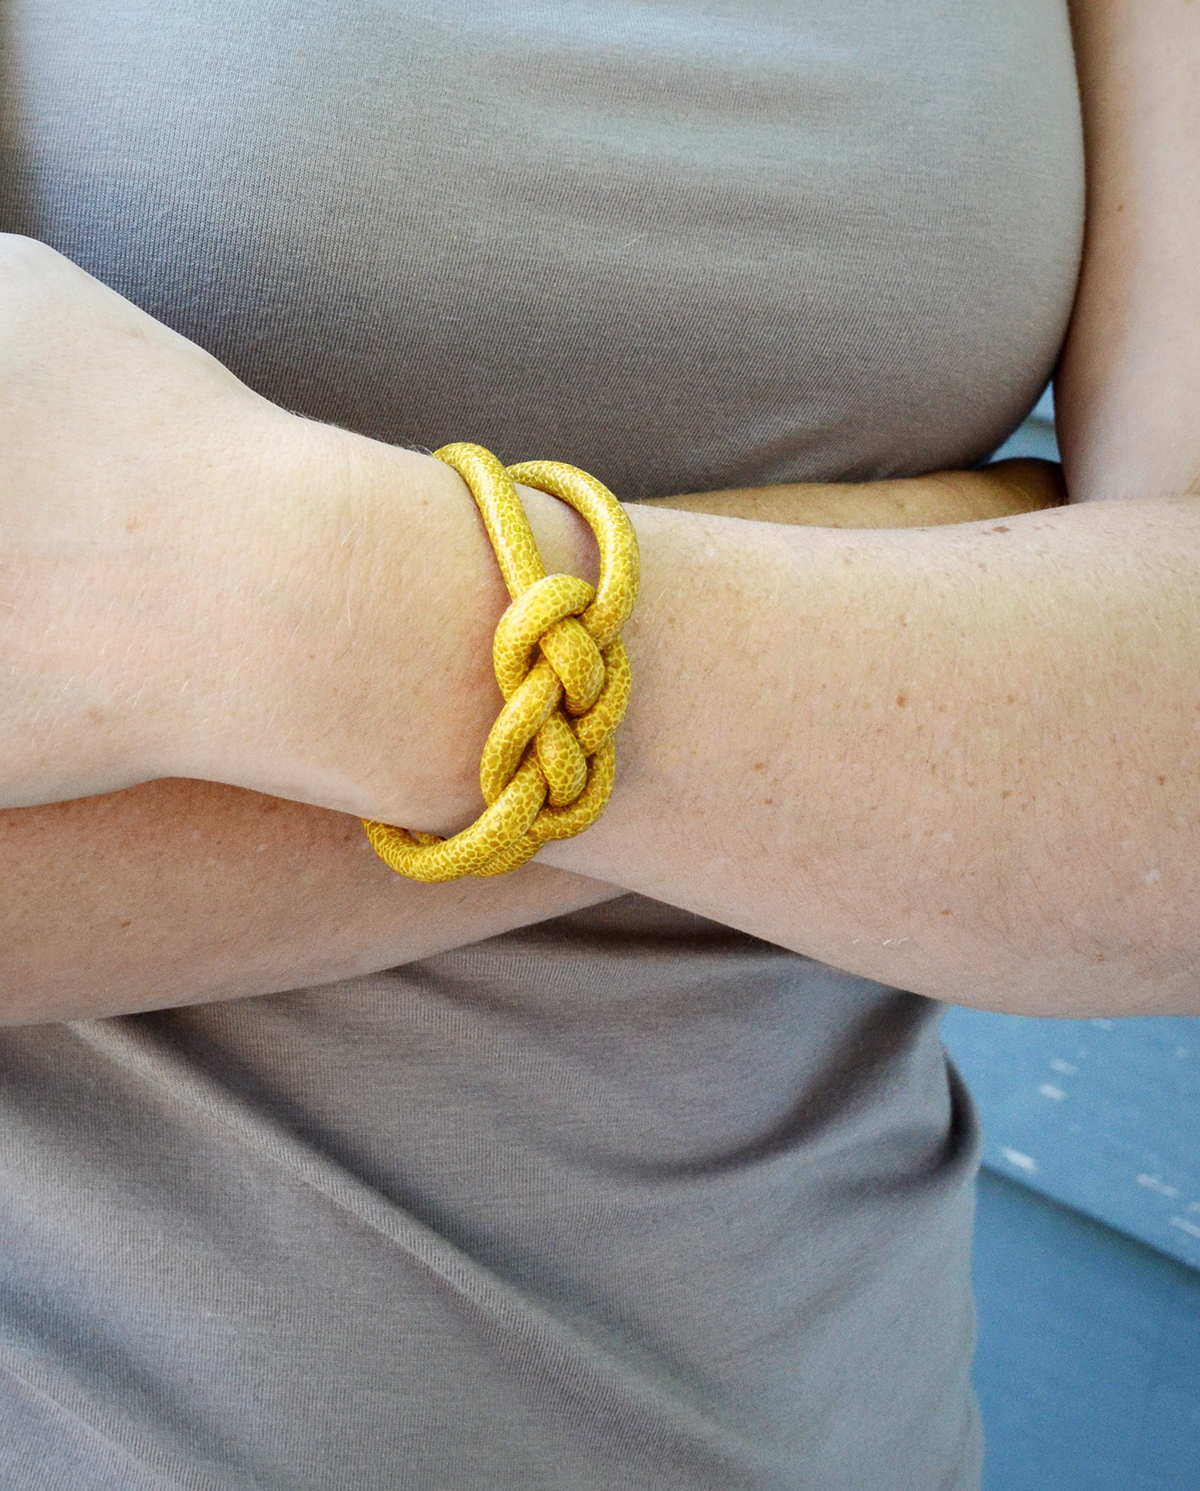 how to make knotted rope bracelets diy 14 How To Make Knotted Rope Bracelets